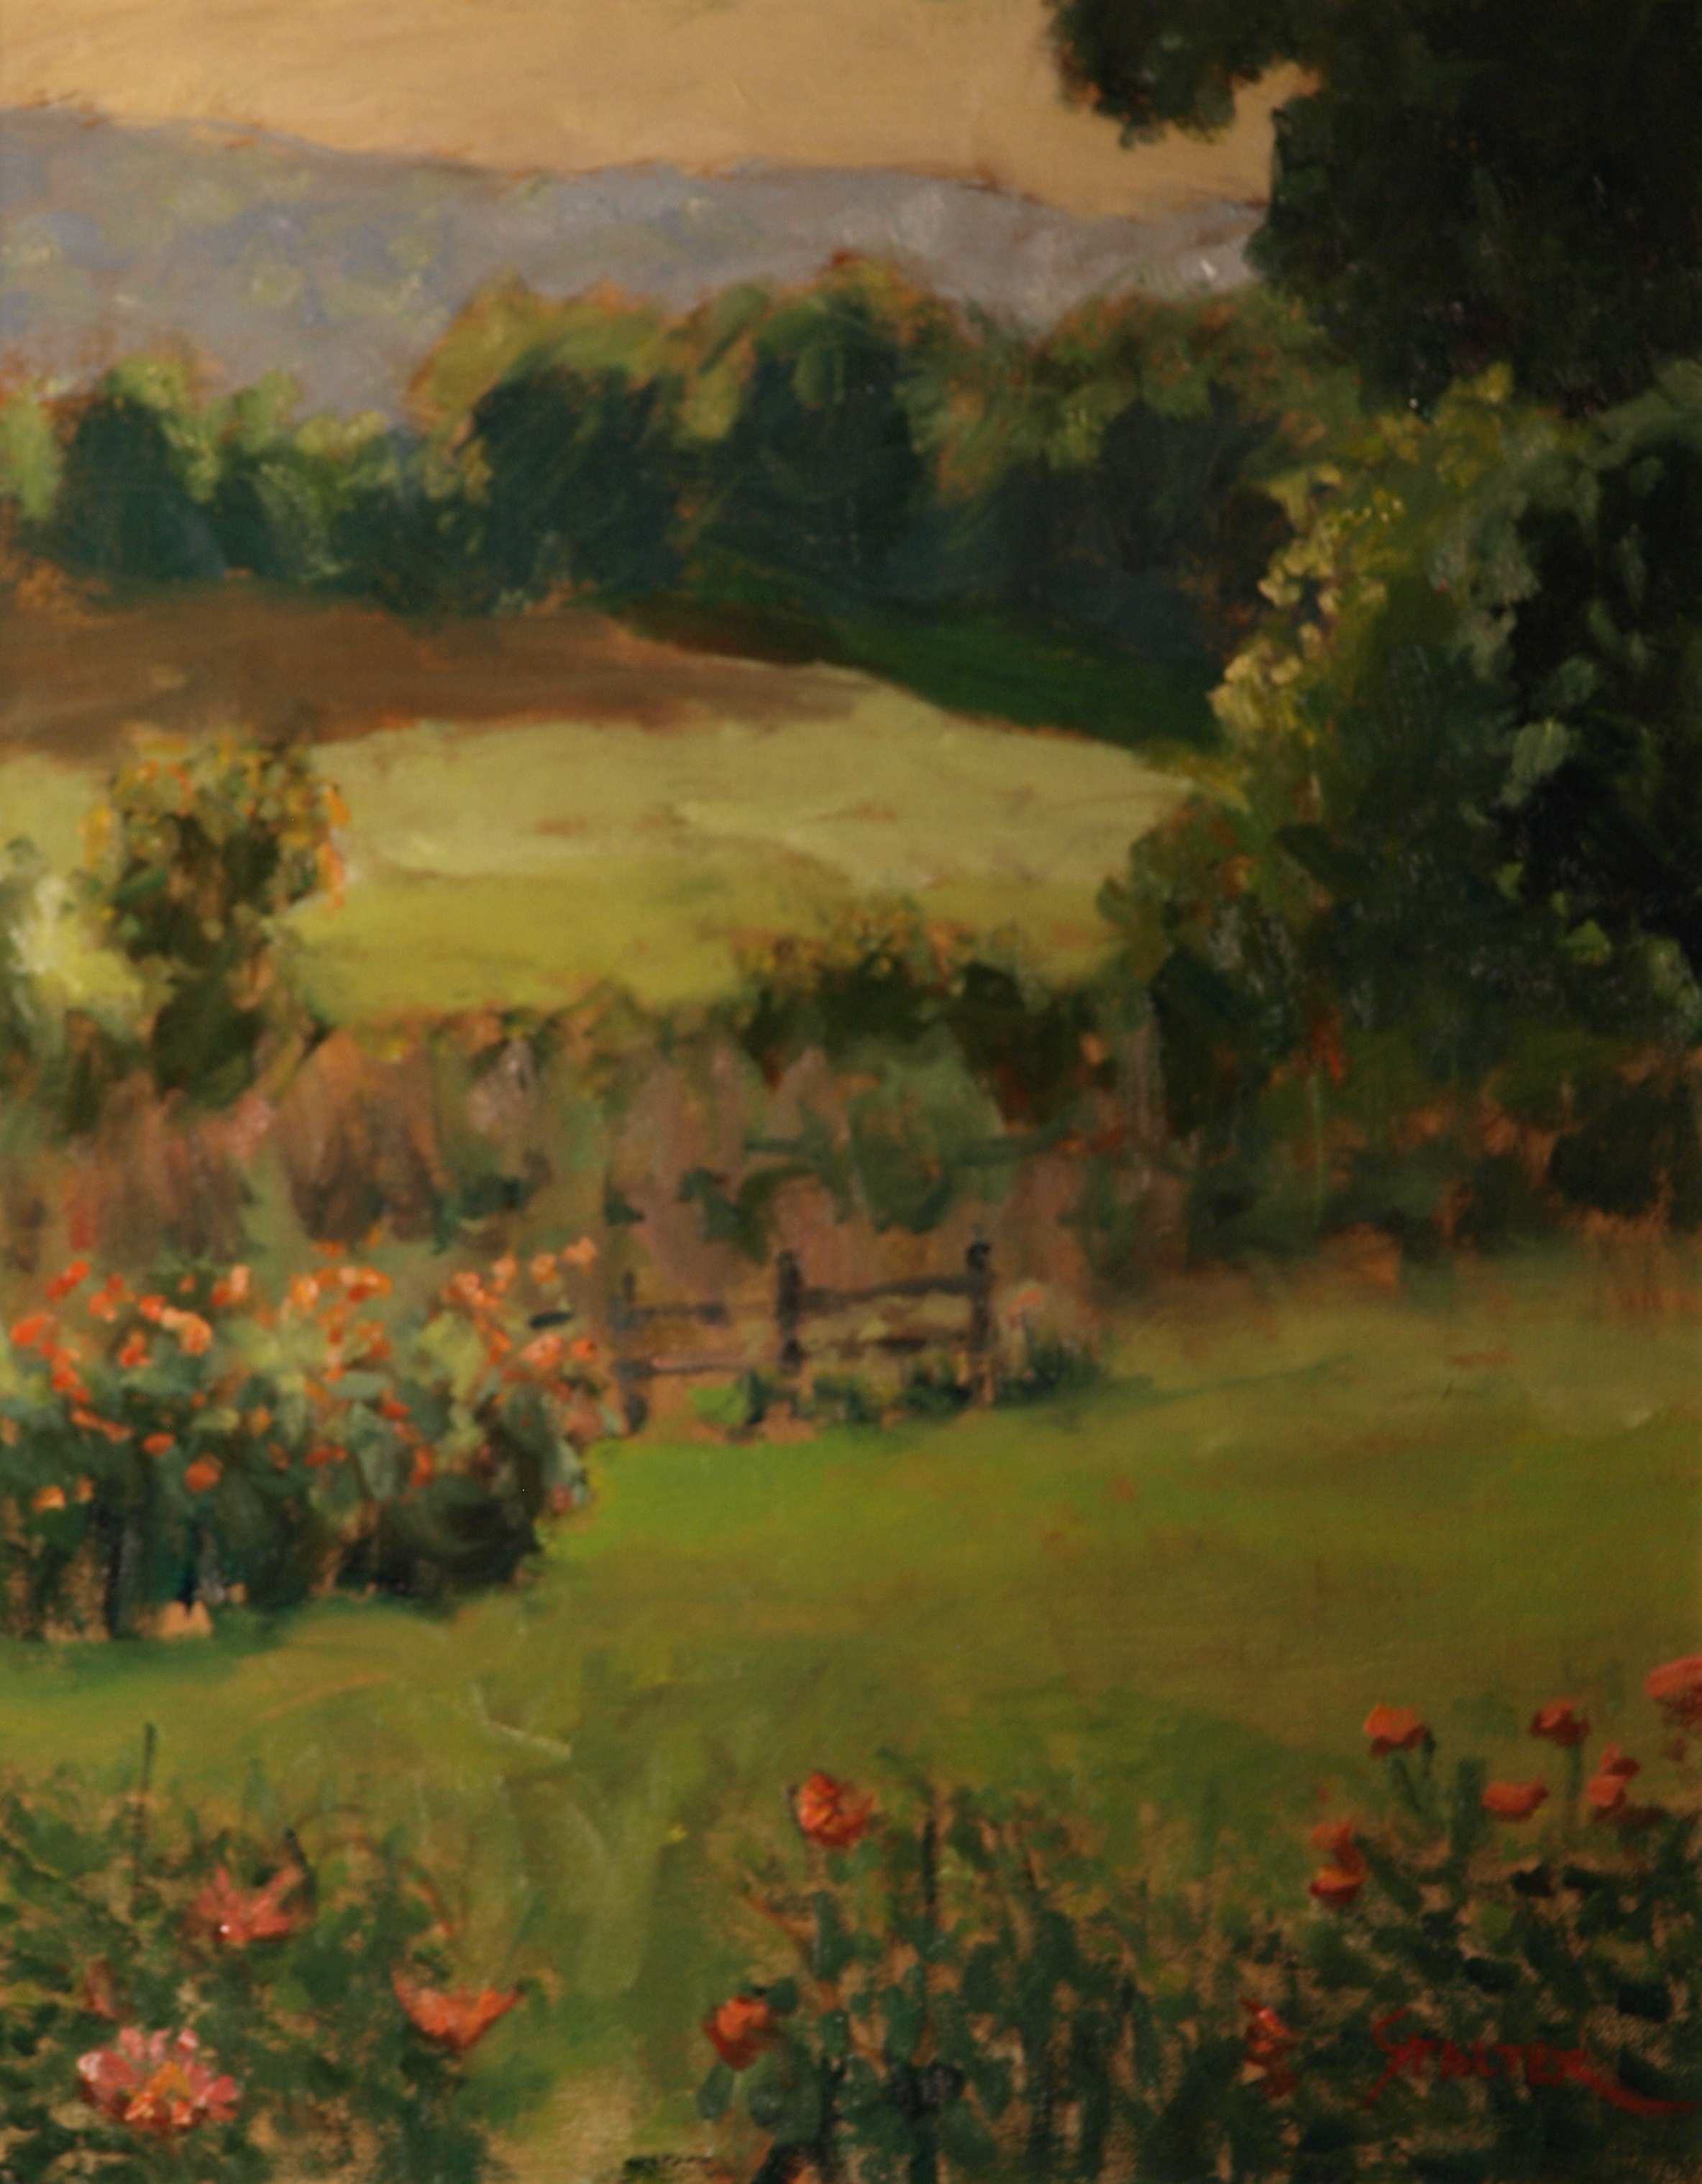 Fields at Sullivan Farms, Oil on Canvas, 20 x 26 Inches, by Richard Stalter, $650